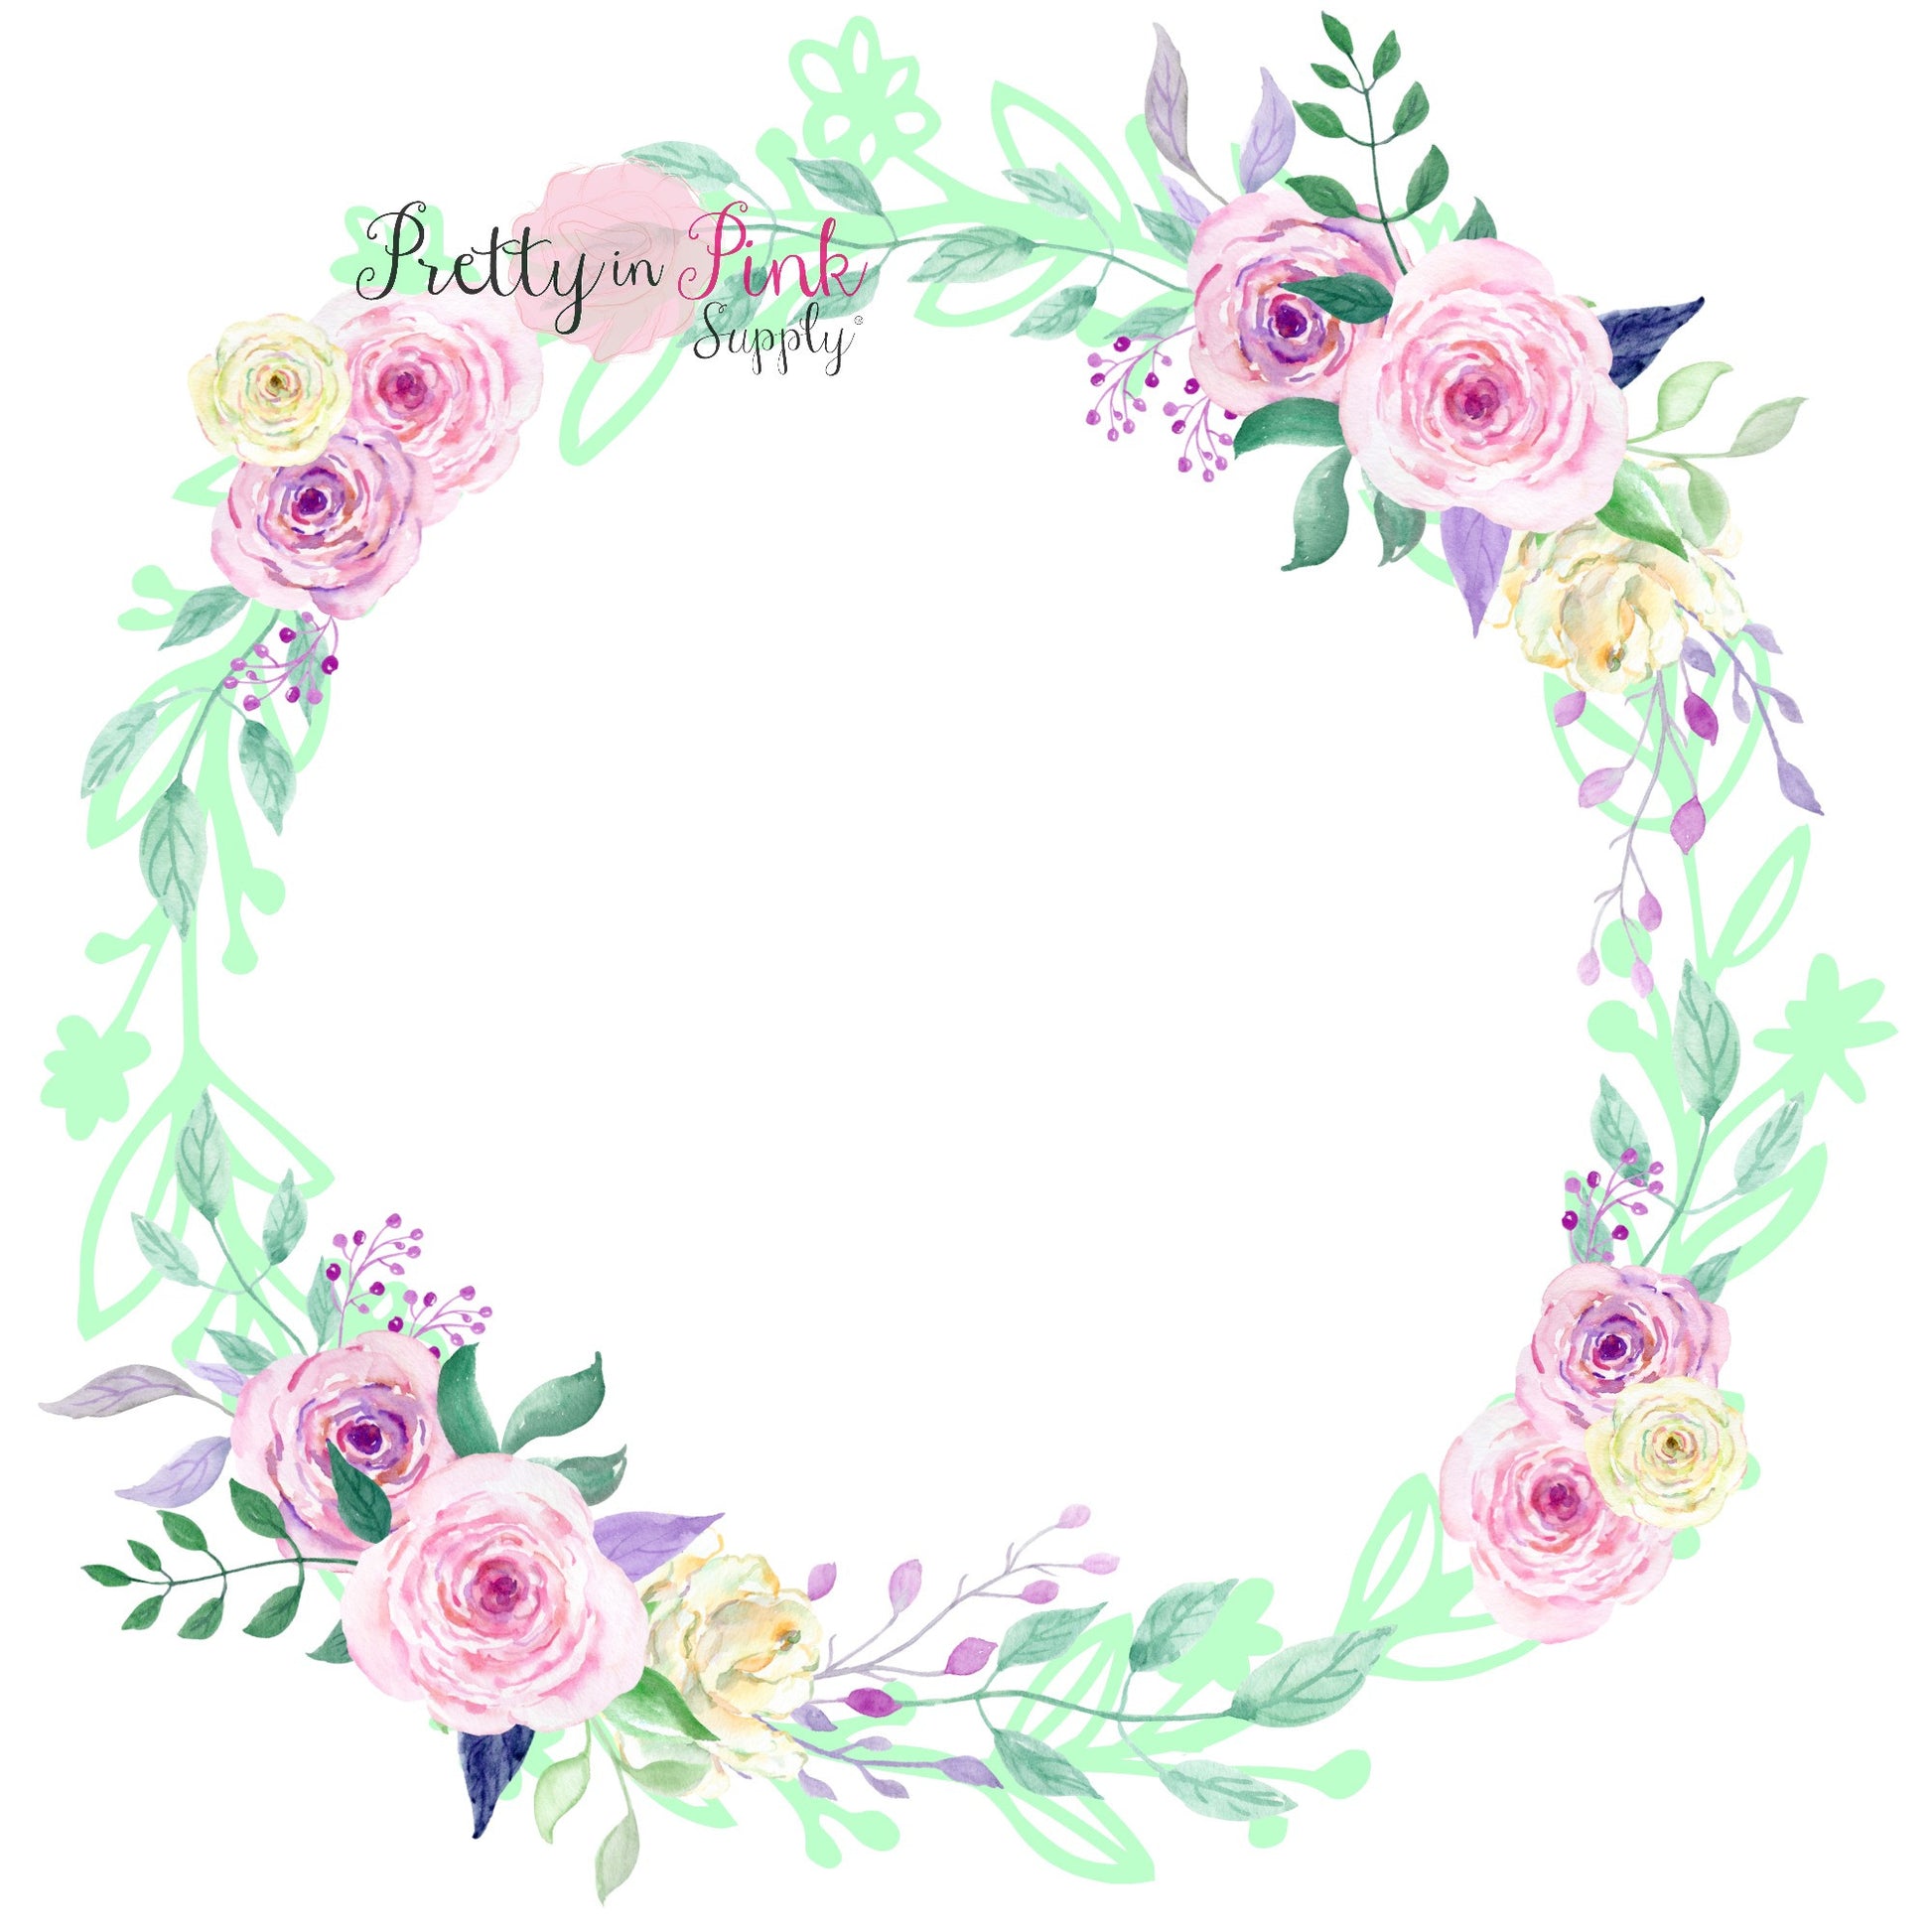 Pink/Lavender Blank Center Floral Wreath Iron On - Pretty in Pink Supply